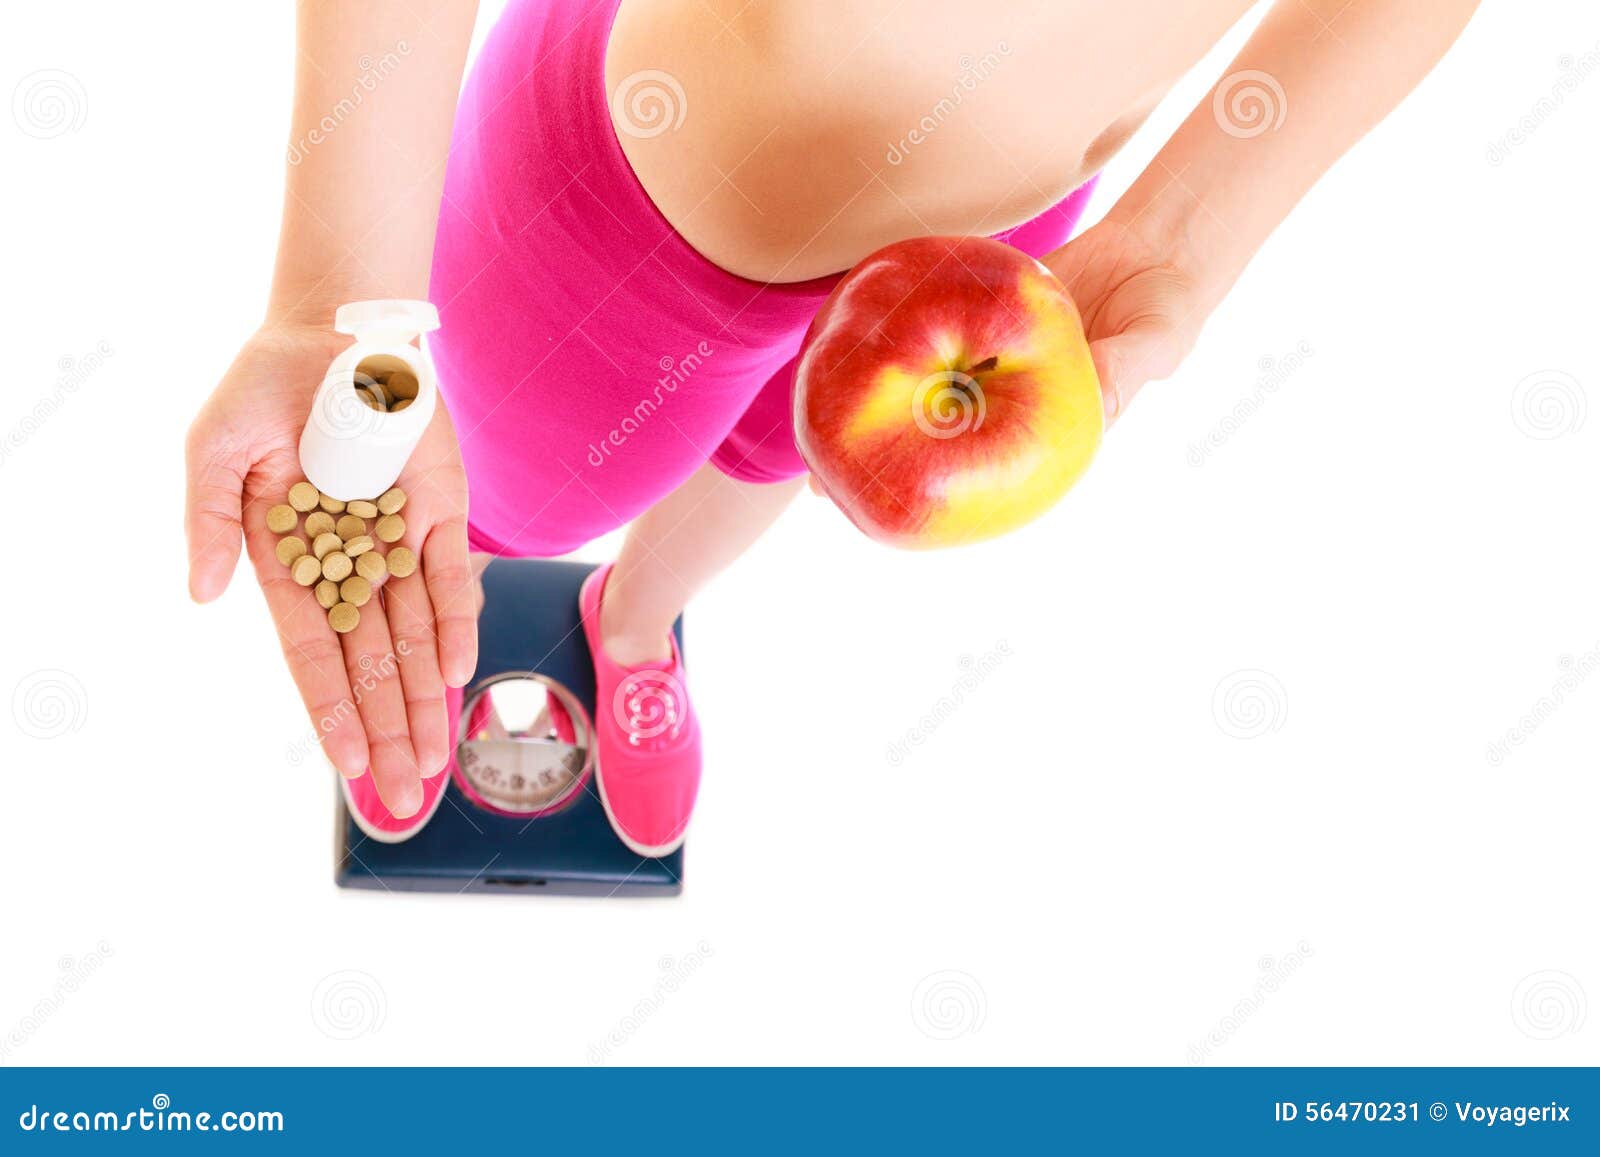 https://thumbs.dreamstime.com/z/woman-holding-vitamins-apple-health-care-young-girl-standing-weighing-scale-pills-choice-synthetic-natural-healthy-56470231.jpg